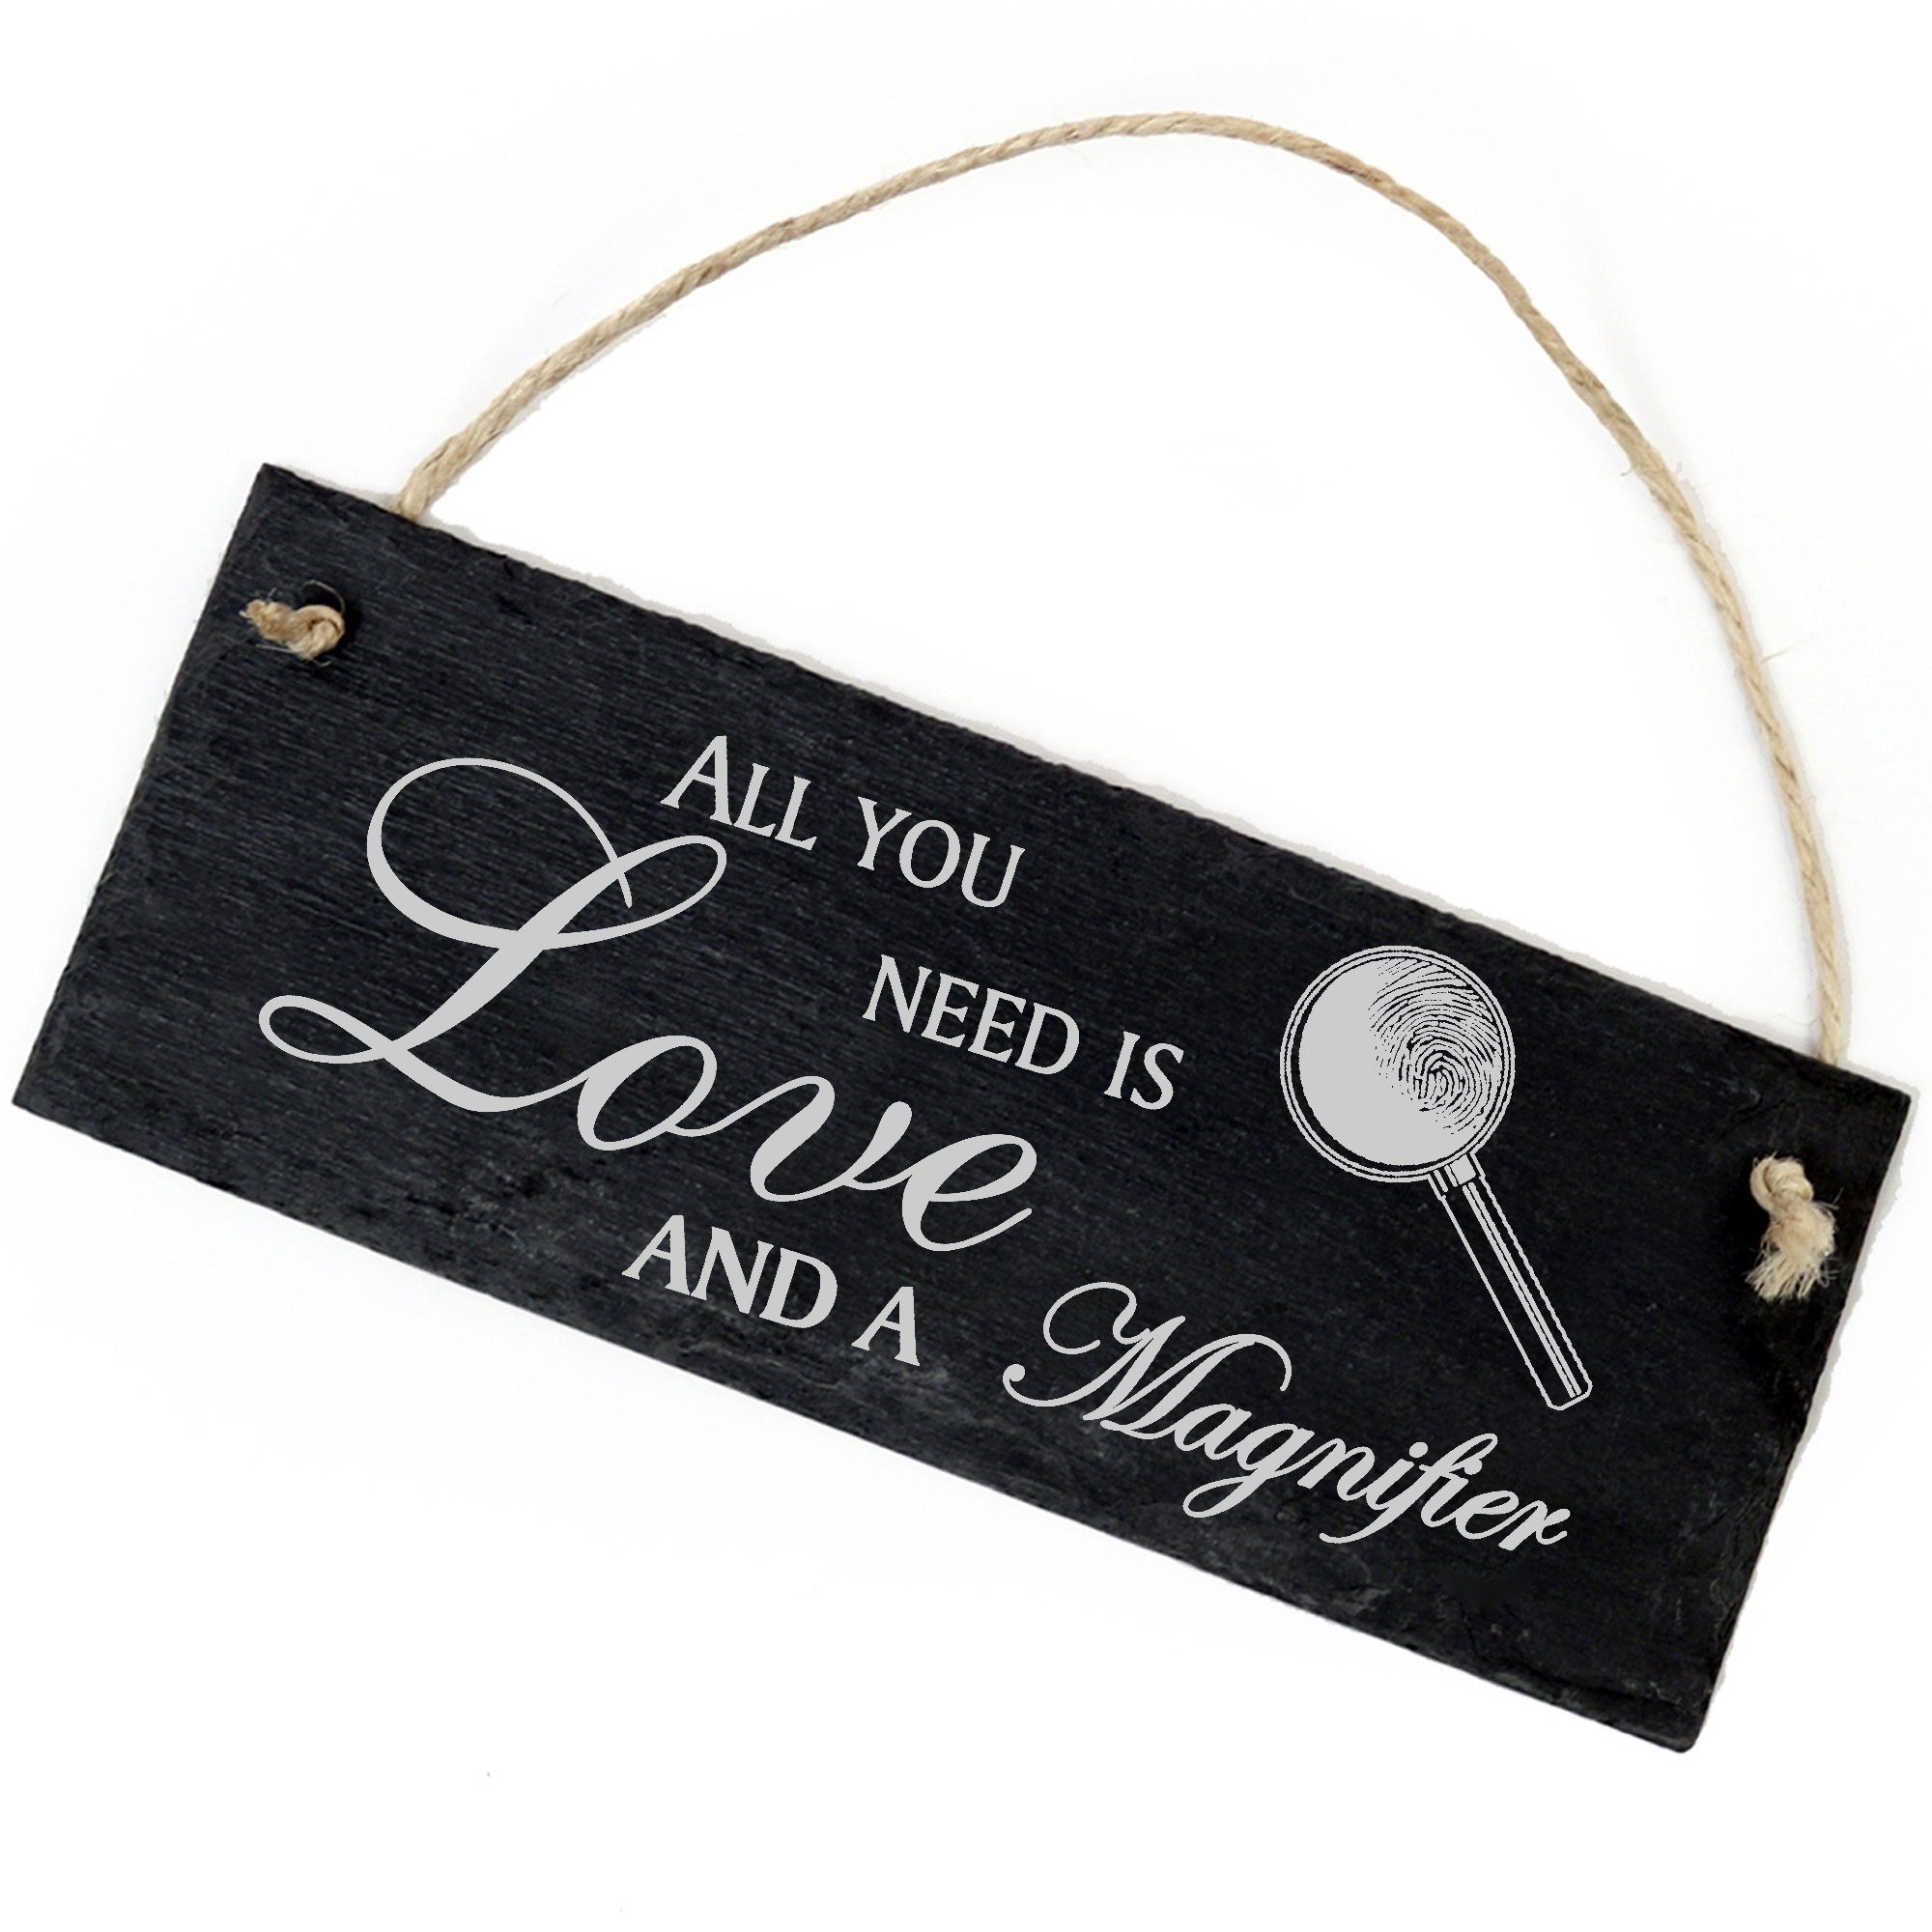 Dekolando Hängedekoration Lupe 22x8cm All you need is Love and a Magnifier